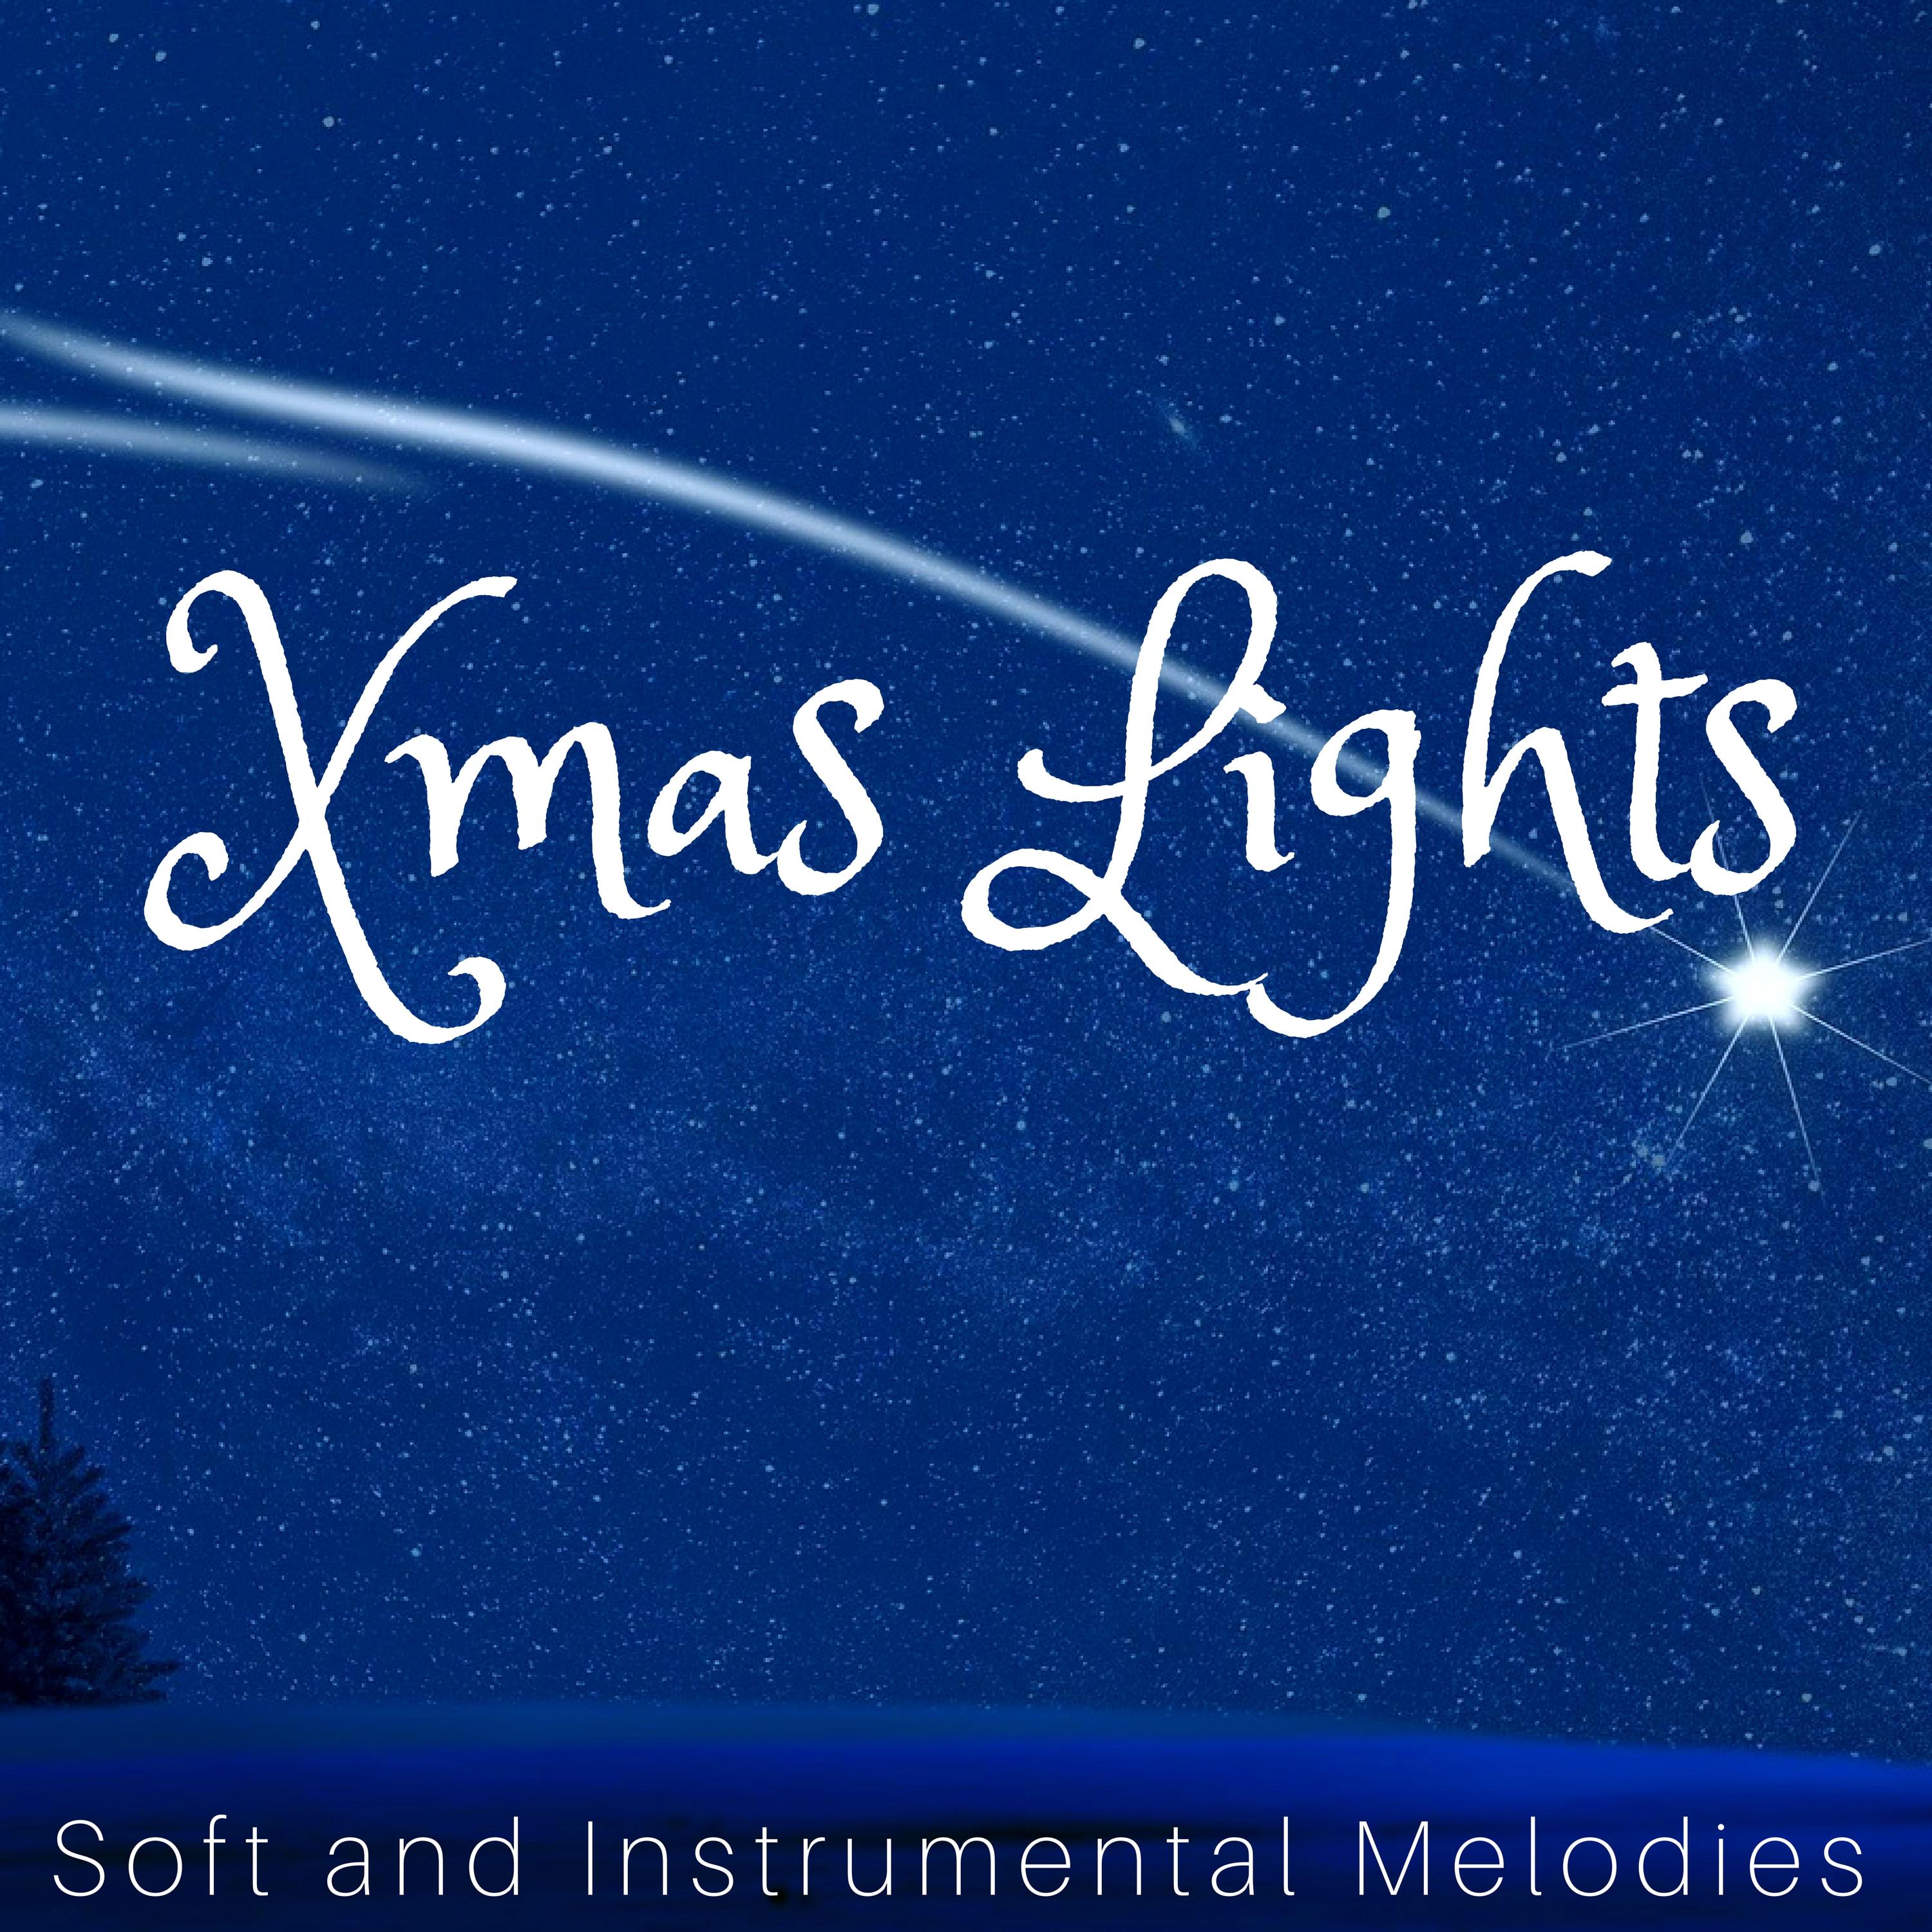 Xmas Lights: Soft and Instrumental Melodies, Snow Fall, Holiday Tracks,White Chistmas